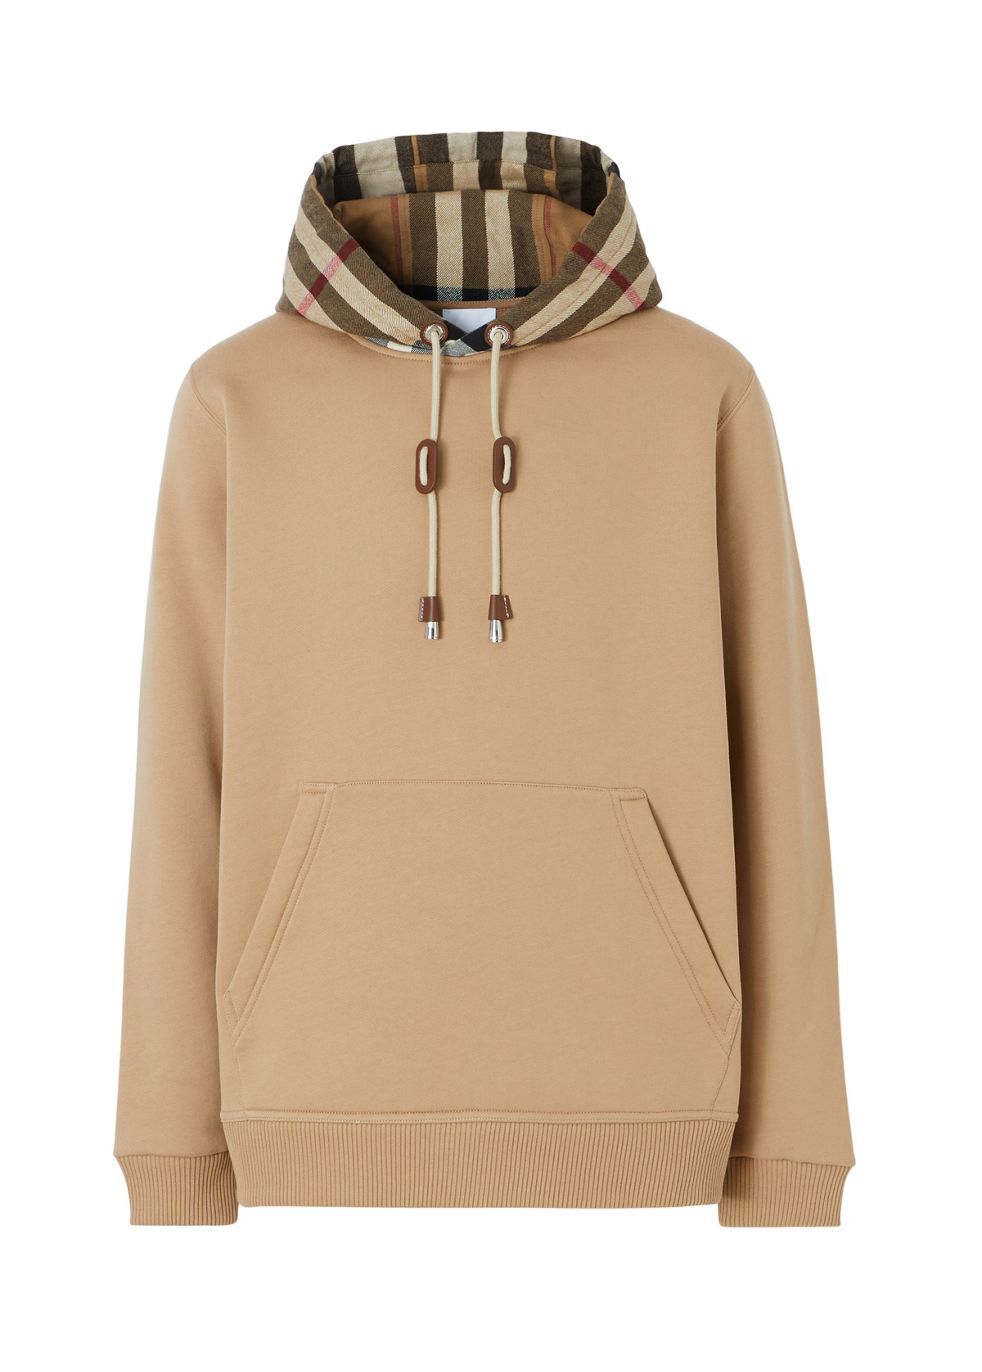 Burberry Check Hood Cotton Blend Hoodie Tops | Heathrow Boutique